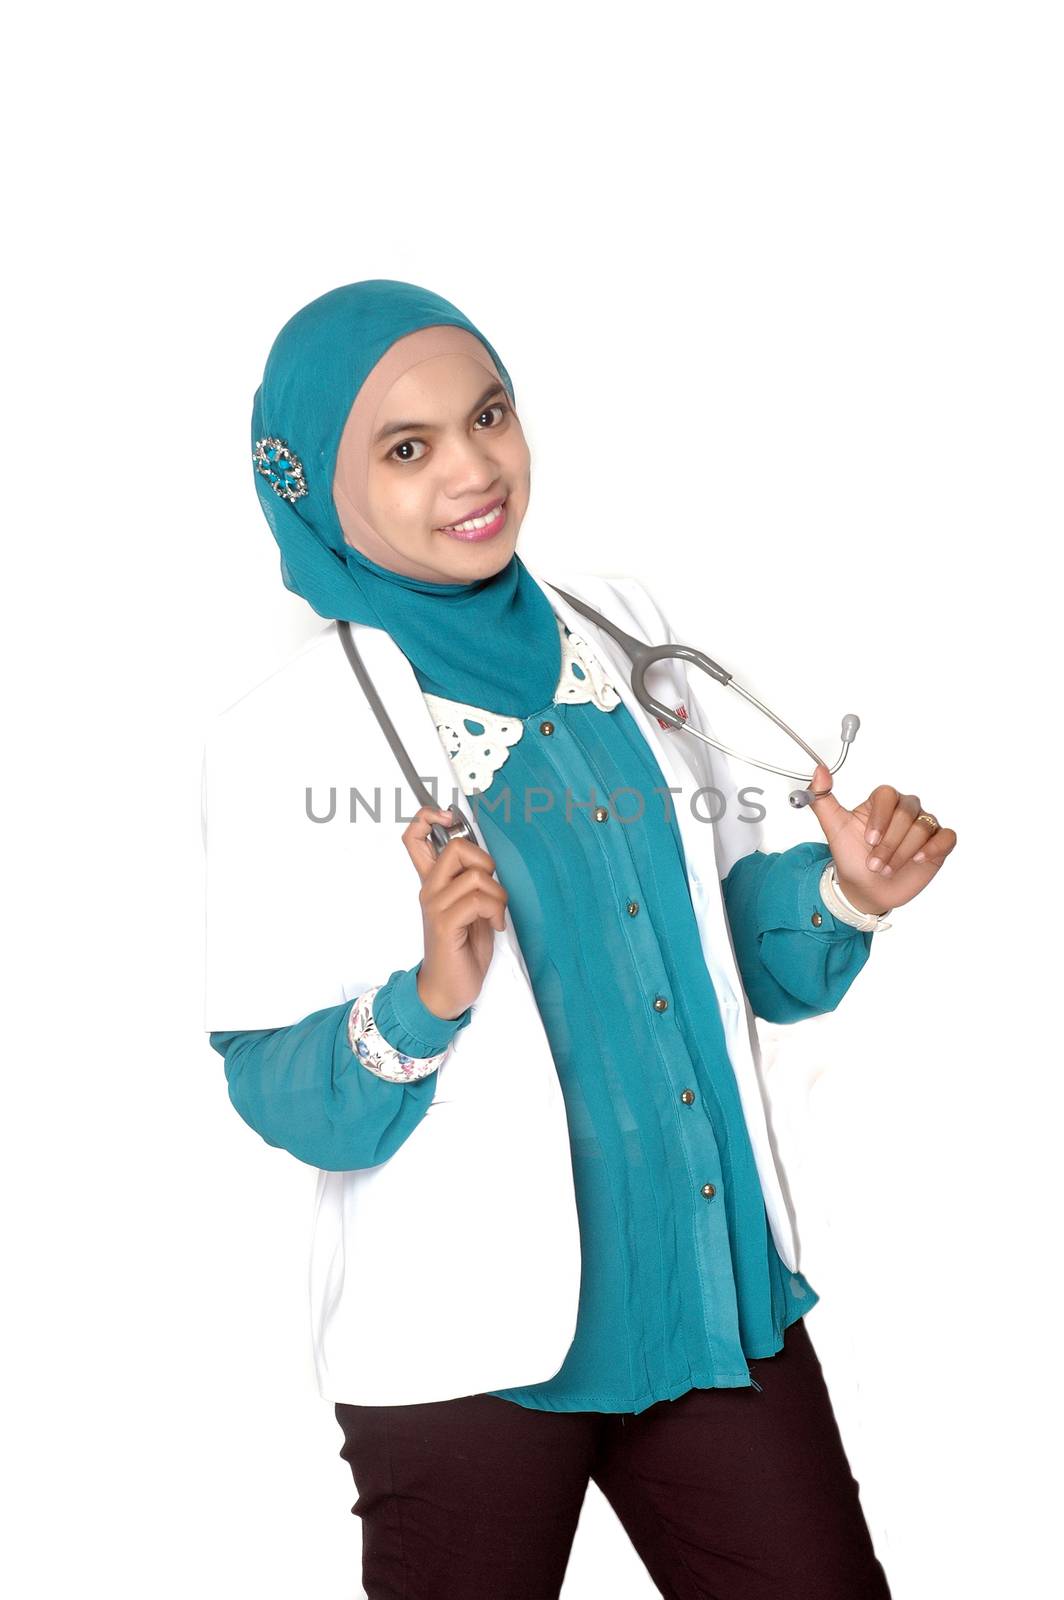 portrait of Asian young woman doctor on white background